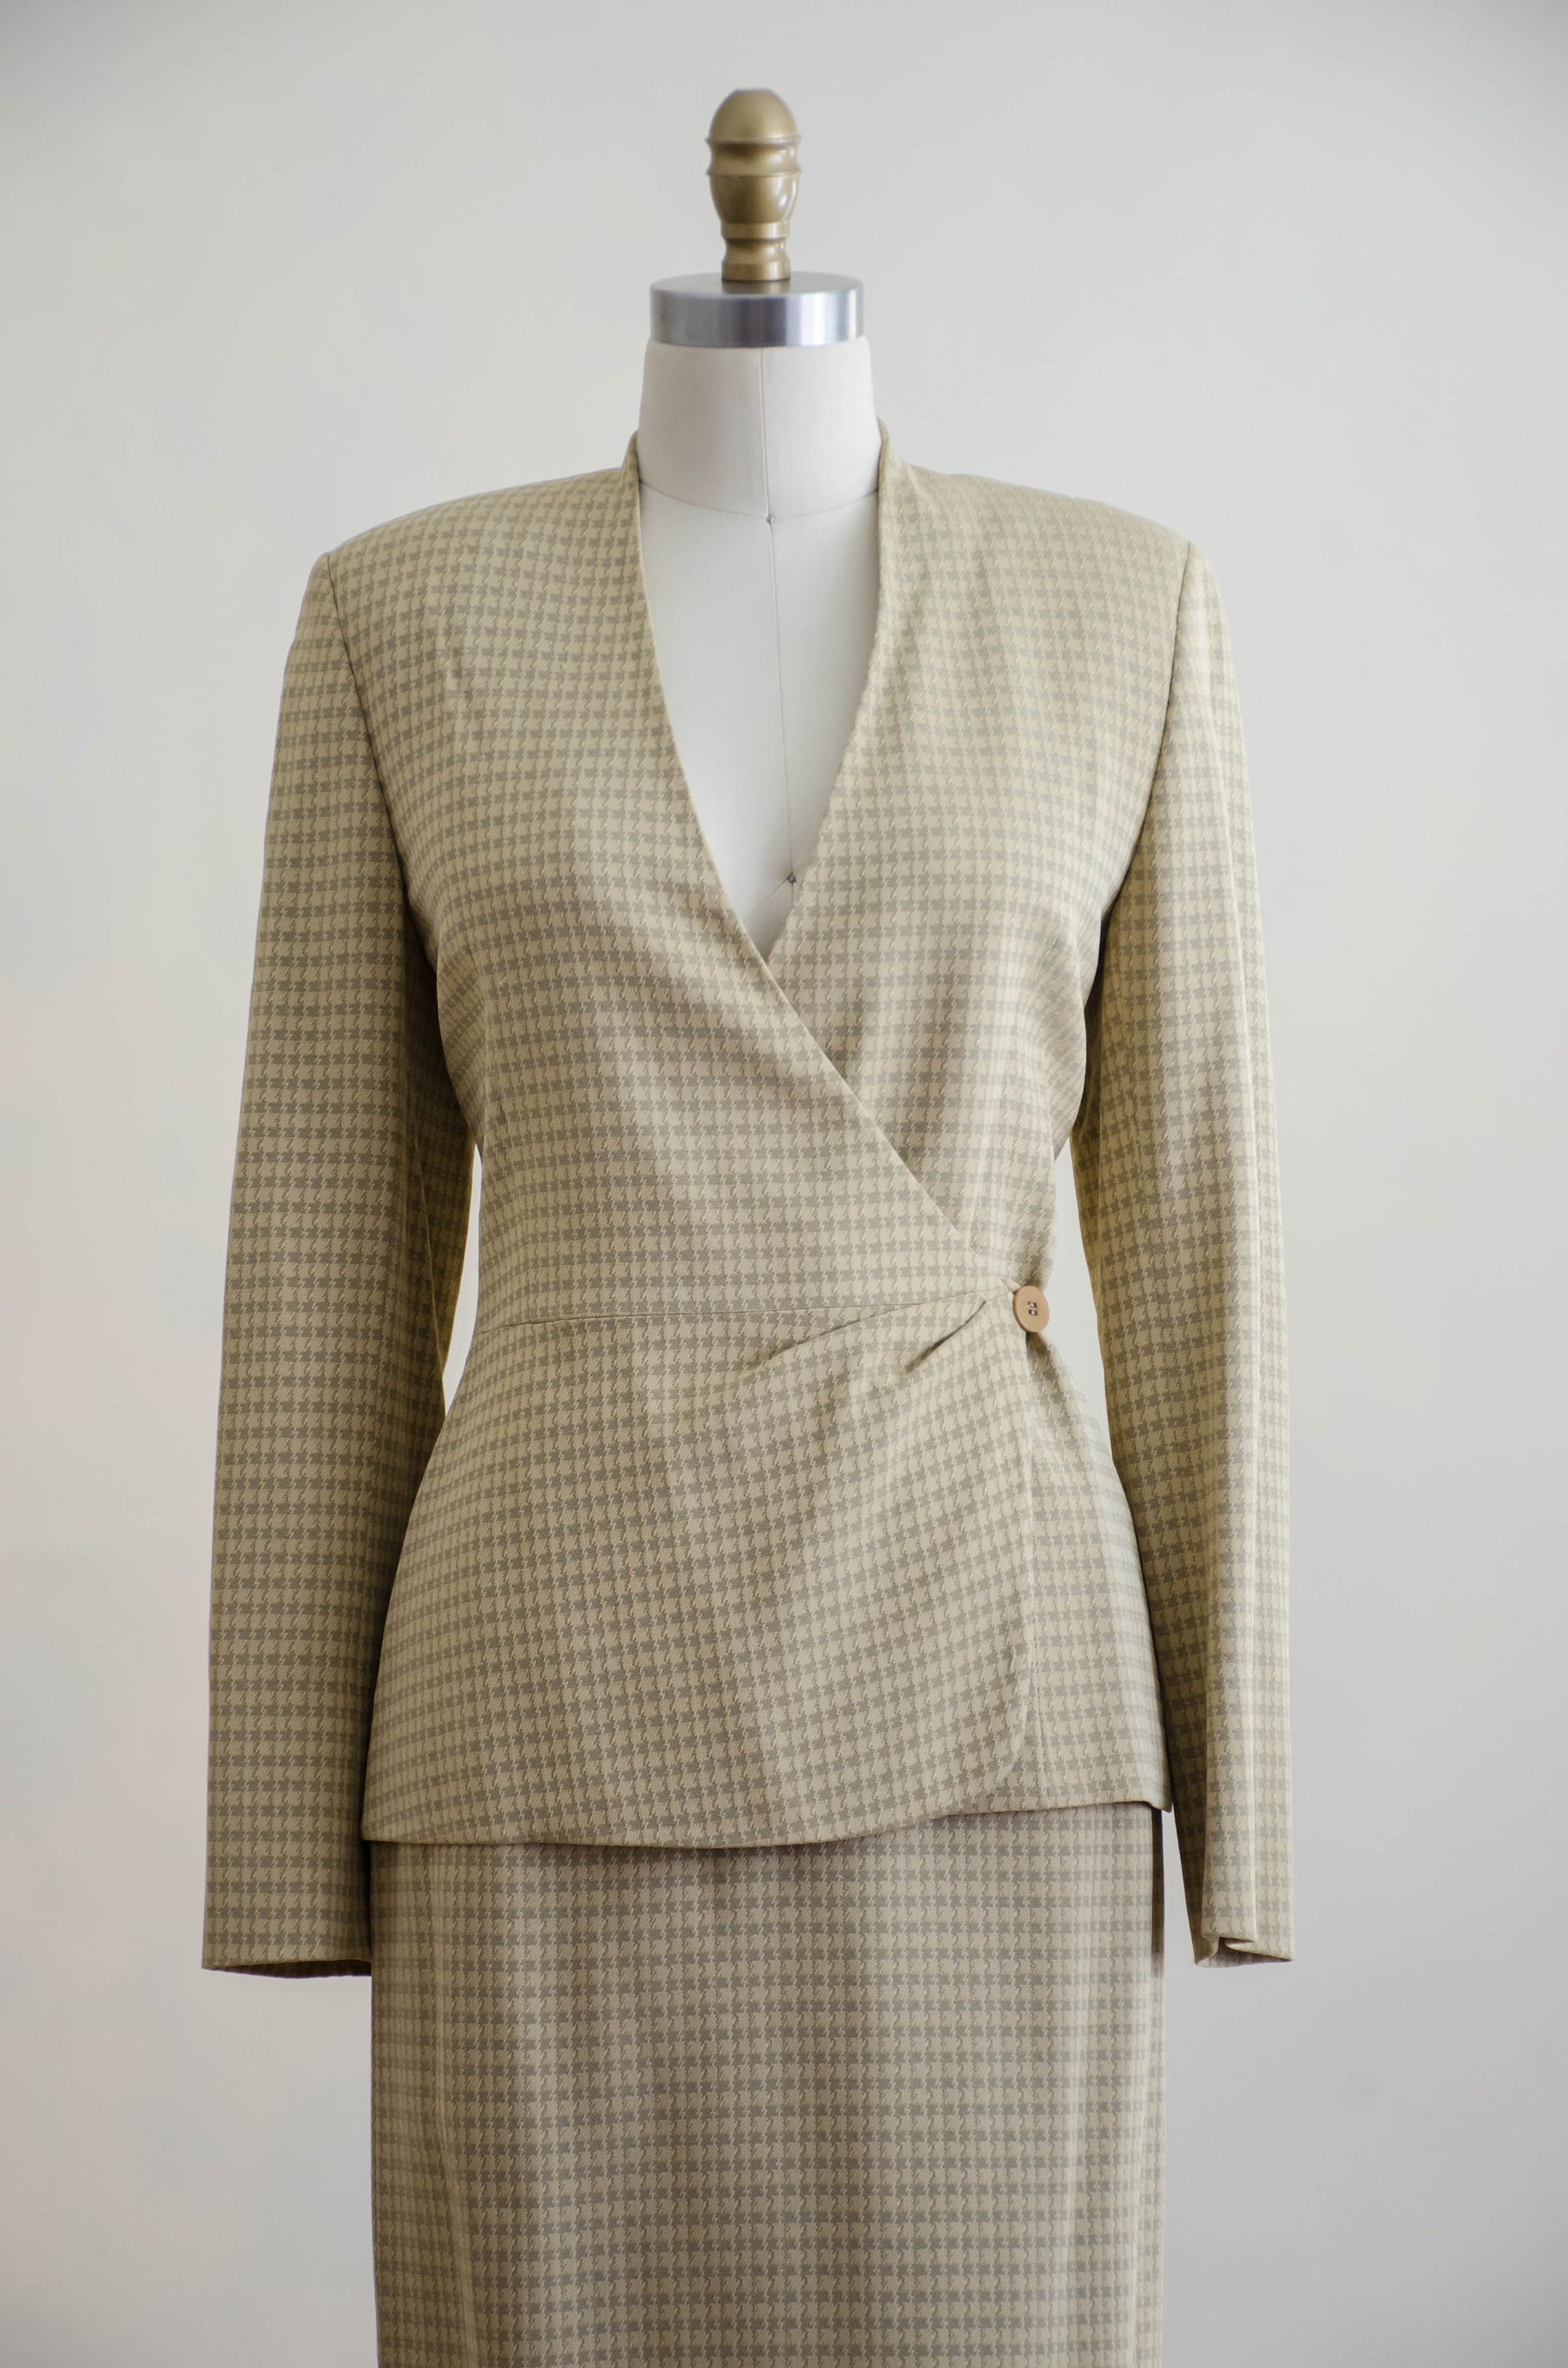 90s Armani suit tan houndstooth women's wool suit | Etsy